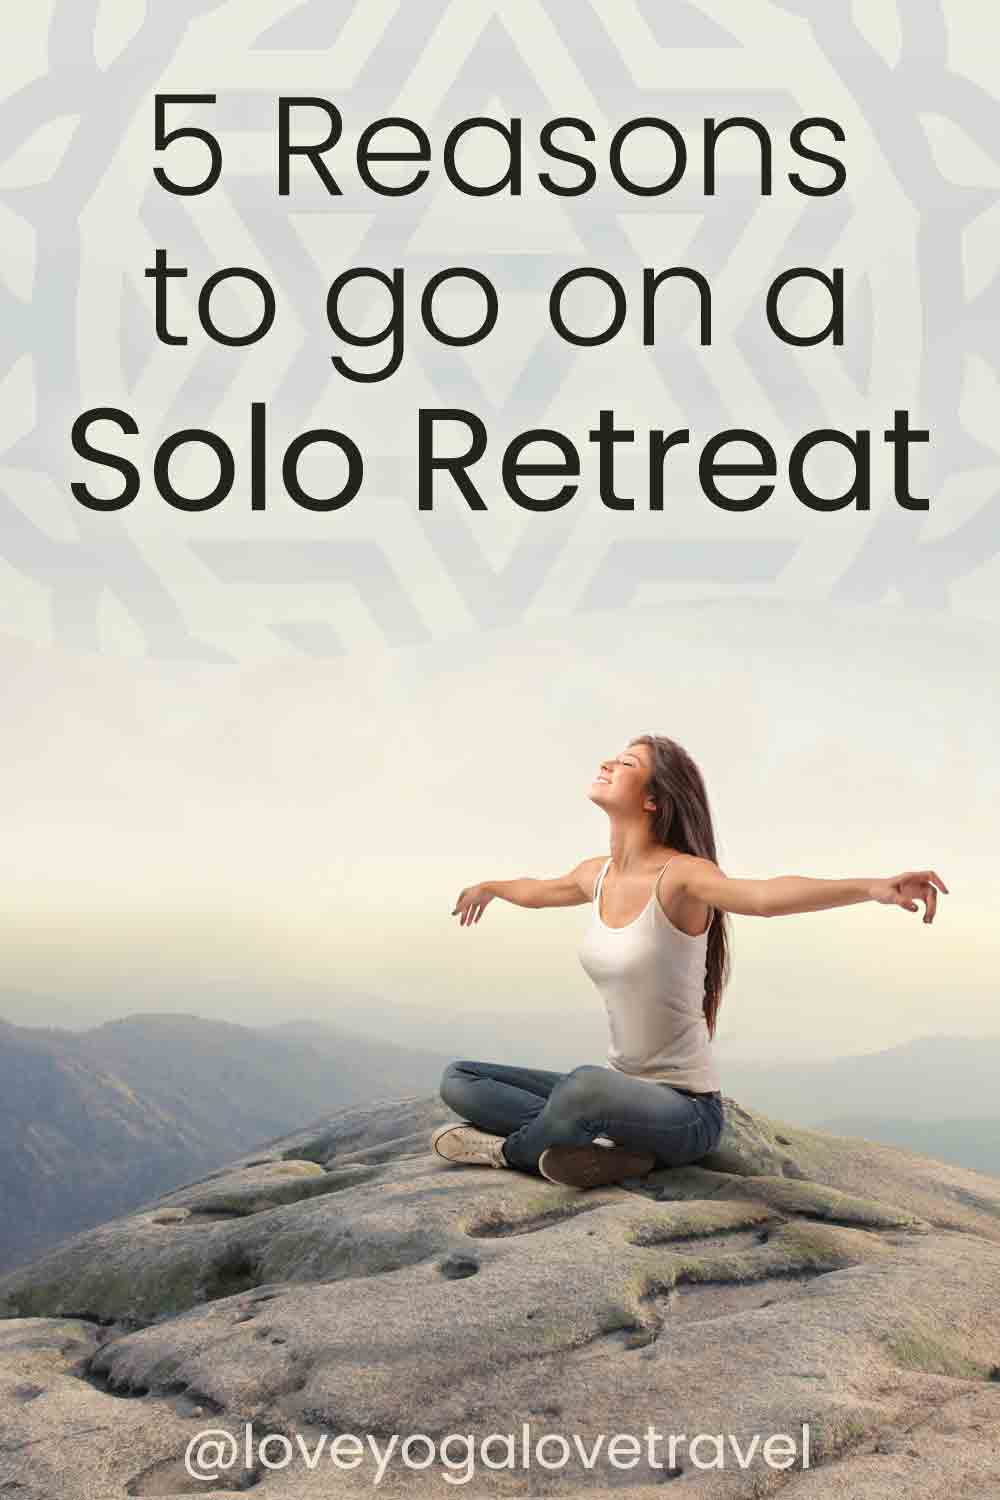 Pin Me! "5 Reasons to go on a Solo Wellness Retreat"